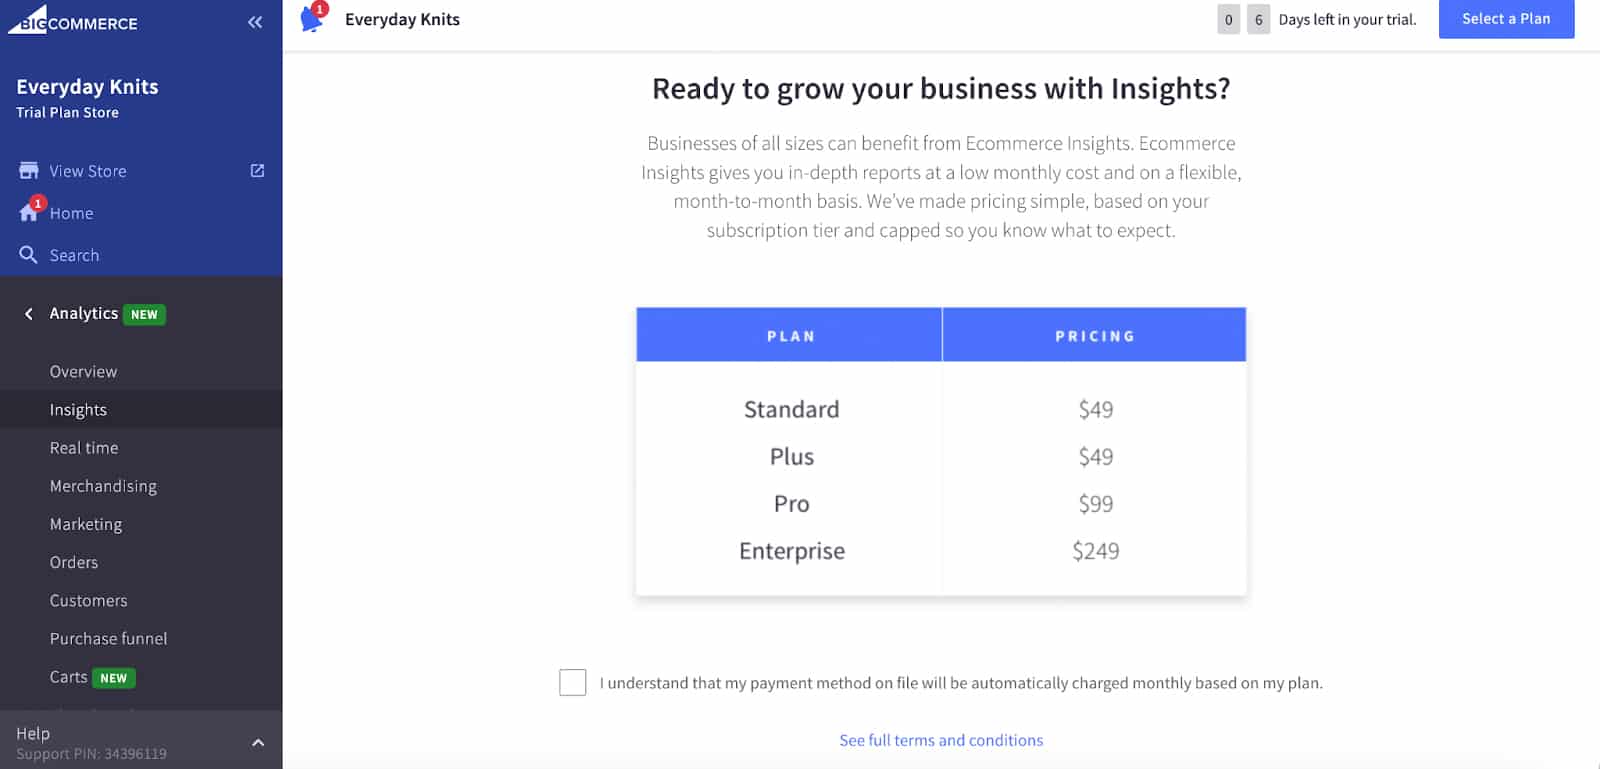 BigCommerce list of Plan to help grow your business.